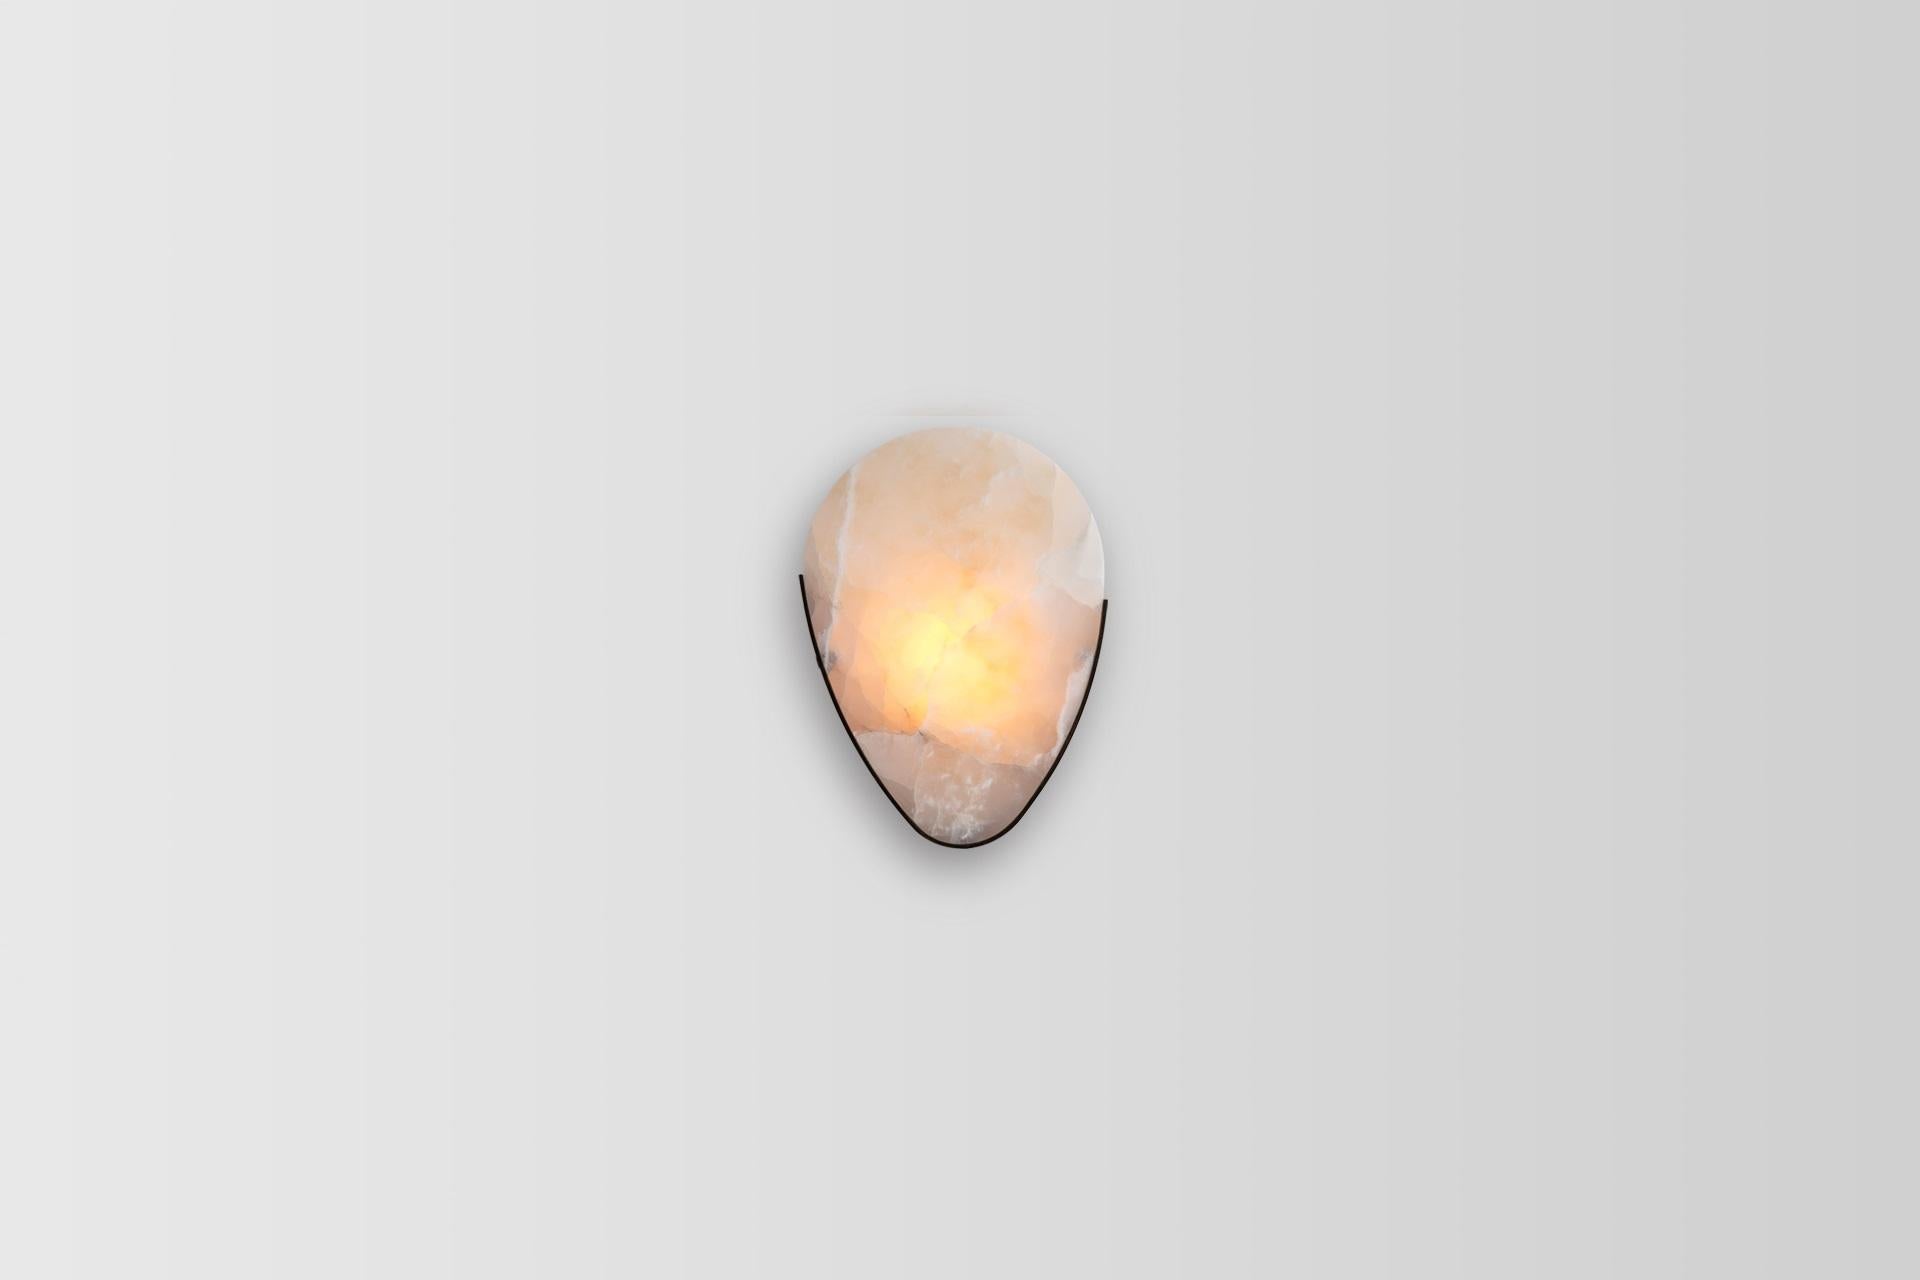 Teardrop marble wall lamp by Atra Design.
Dimensions: D 28 x W 15 x H 38 cm
Materials: White Onyx Marble, brass

Atra Design
We are Atra, a furniture brand produced by Atra form a mexico city–based high end production facility that also houses our